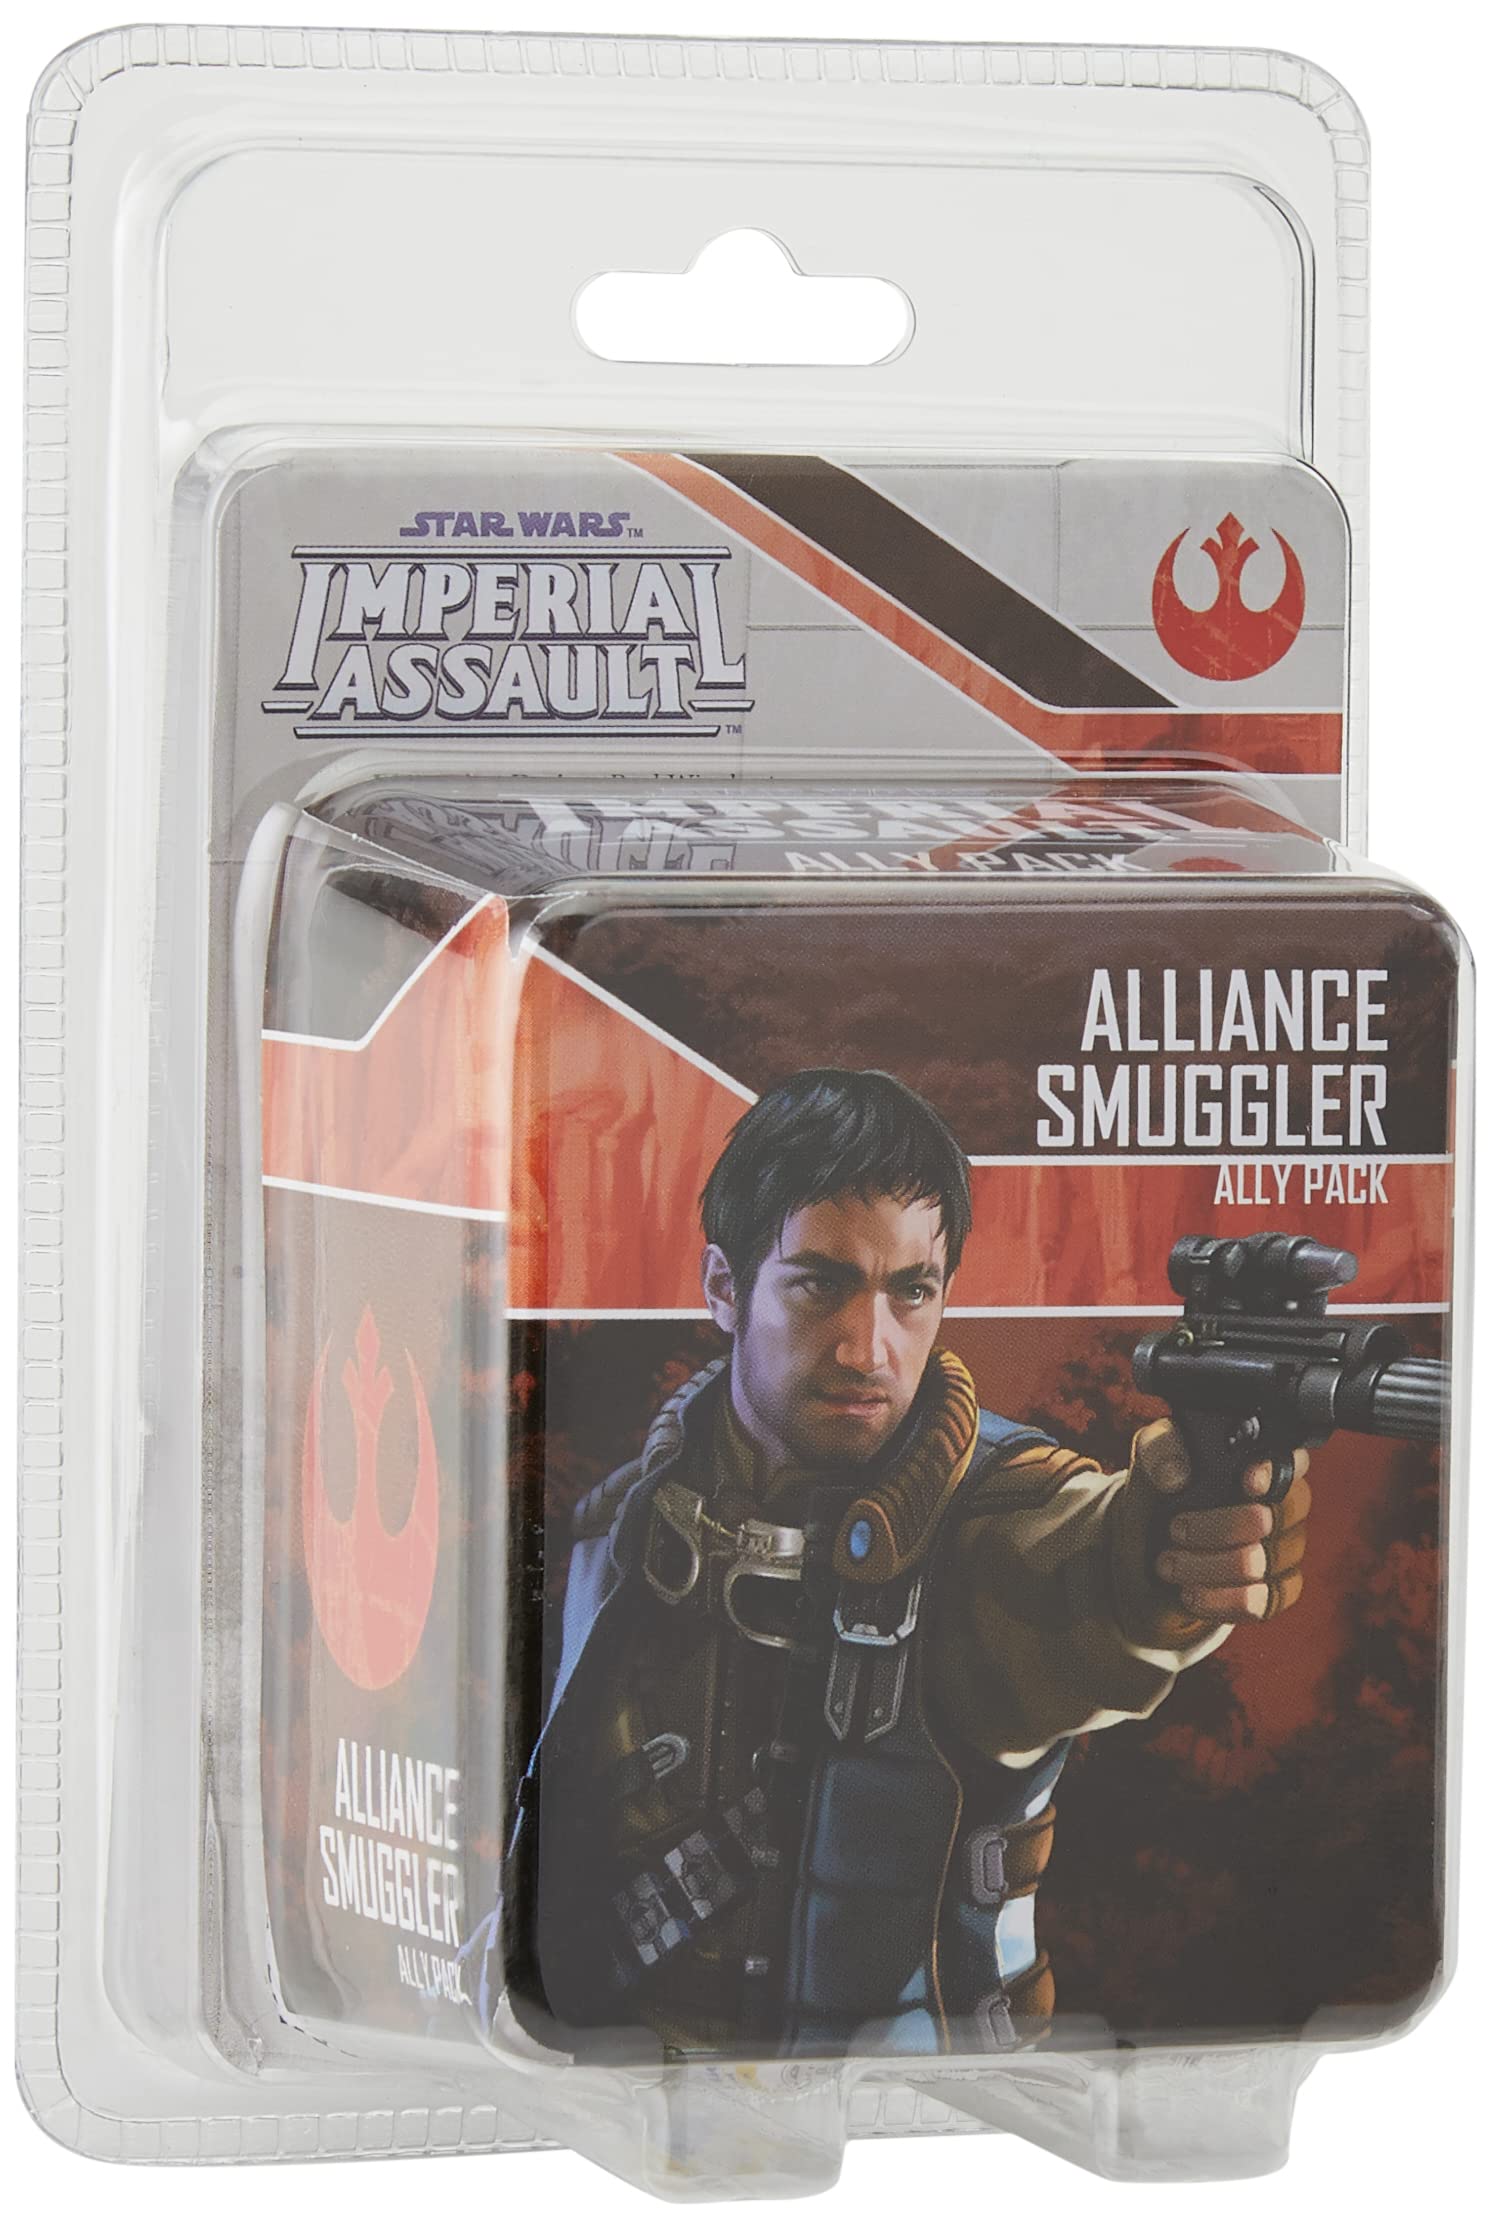 Star Wars Imperial Assault Board Game Alliance Smuggler ALLY PACK - Epic Sci-Fi Miniatures Strategy Game for Kids and Adults, Ages 14+, 1-5 Players, 1-2 Hour Playtime, Made by Fantasy Flight Games